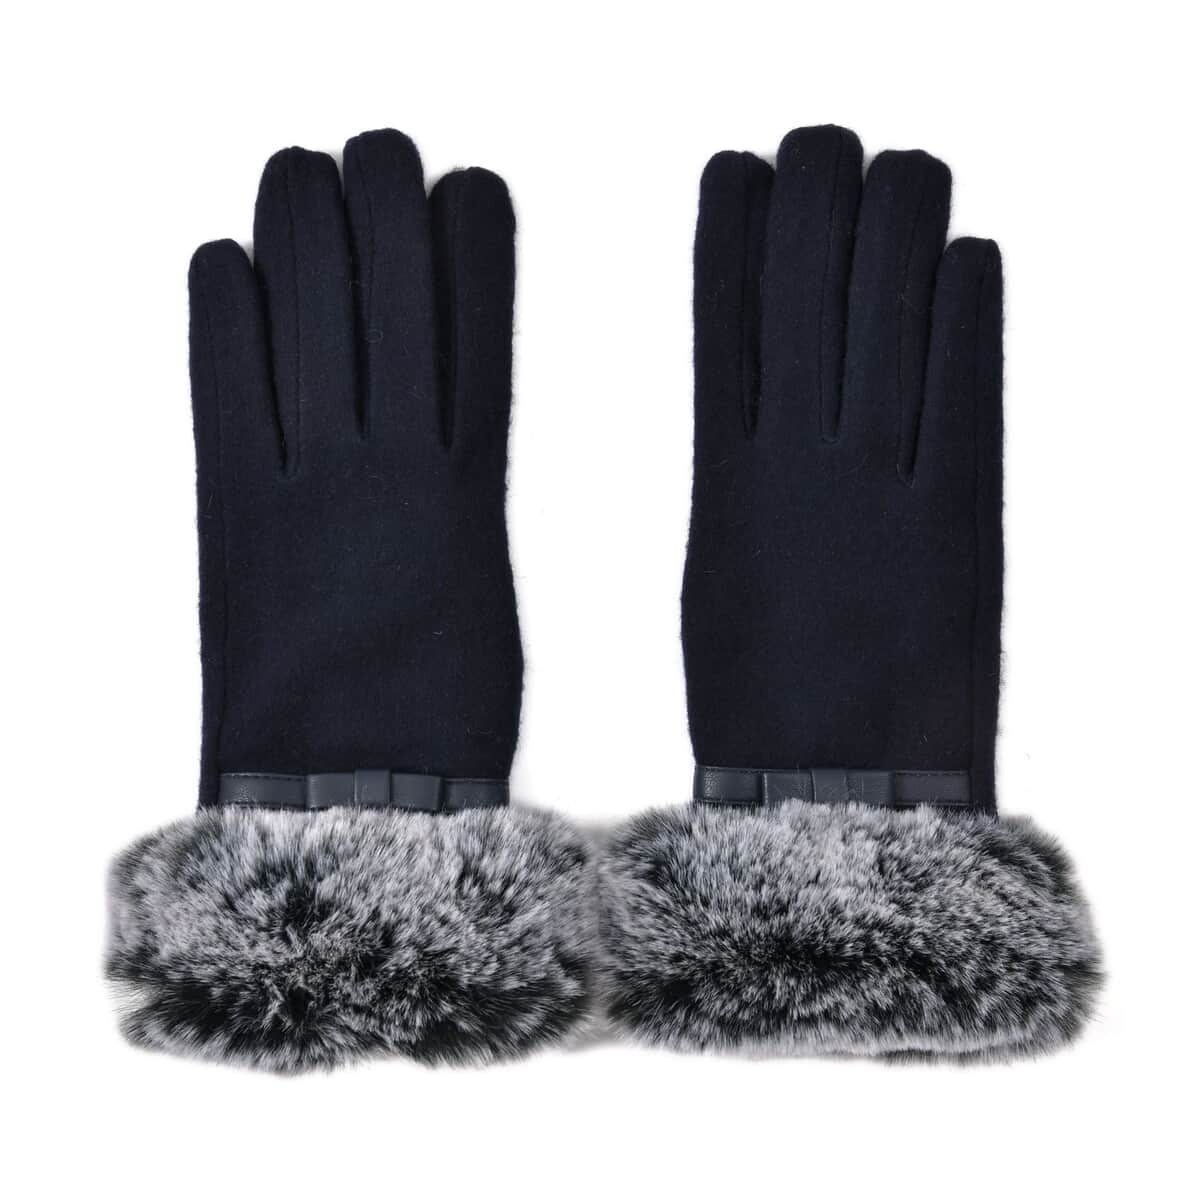 Navy cashmere gloves with faux fur with Touch screen function (9.05"x3.54") image number 0